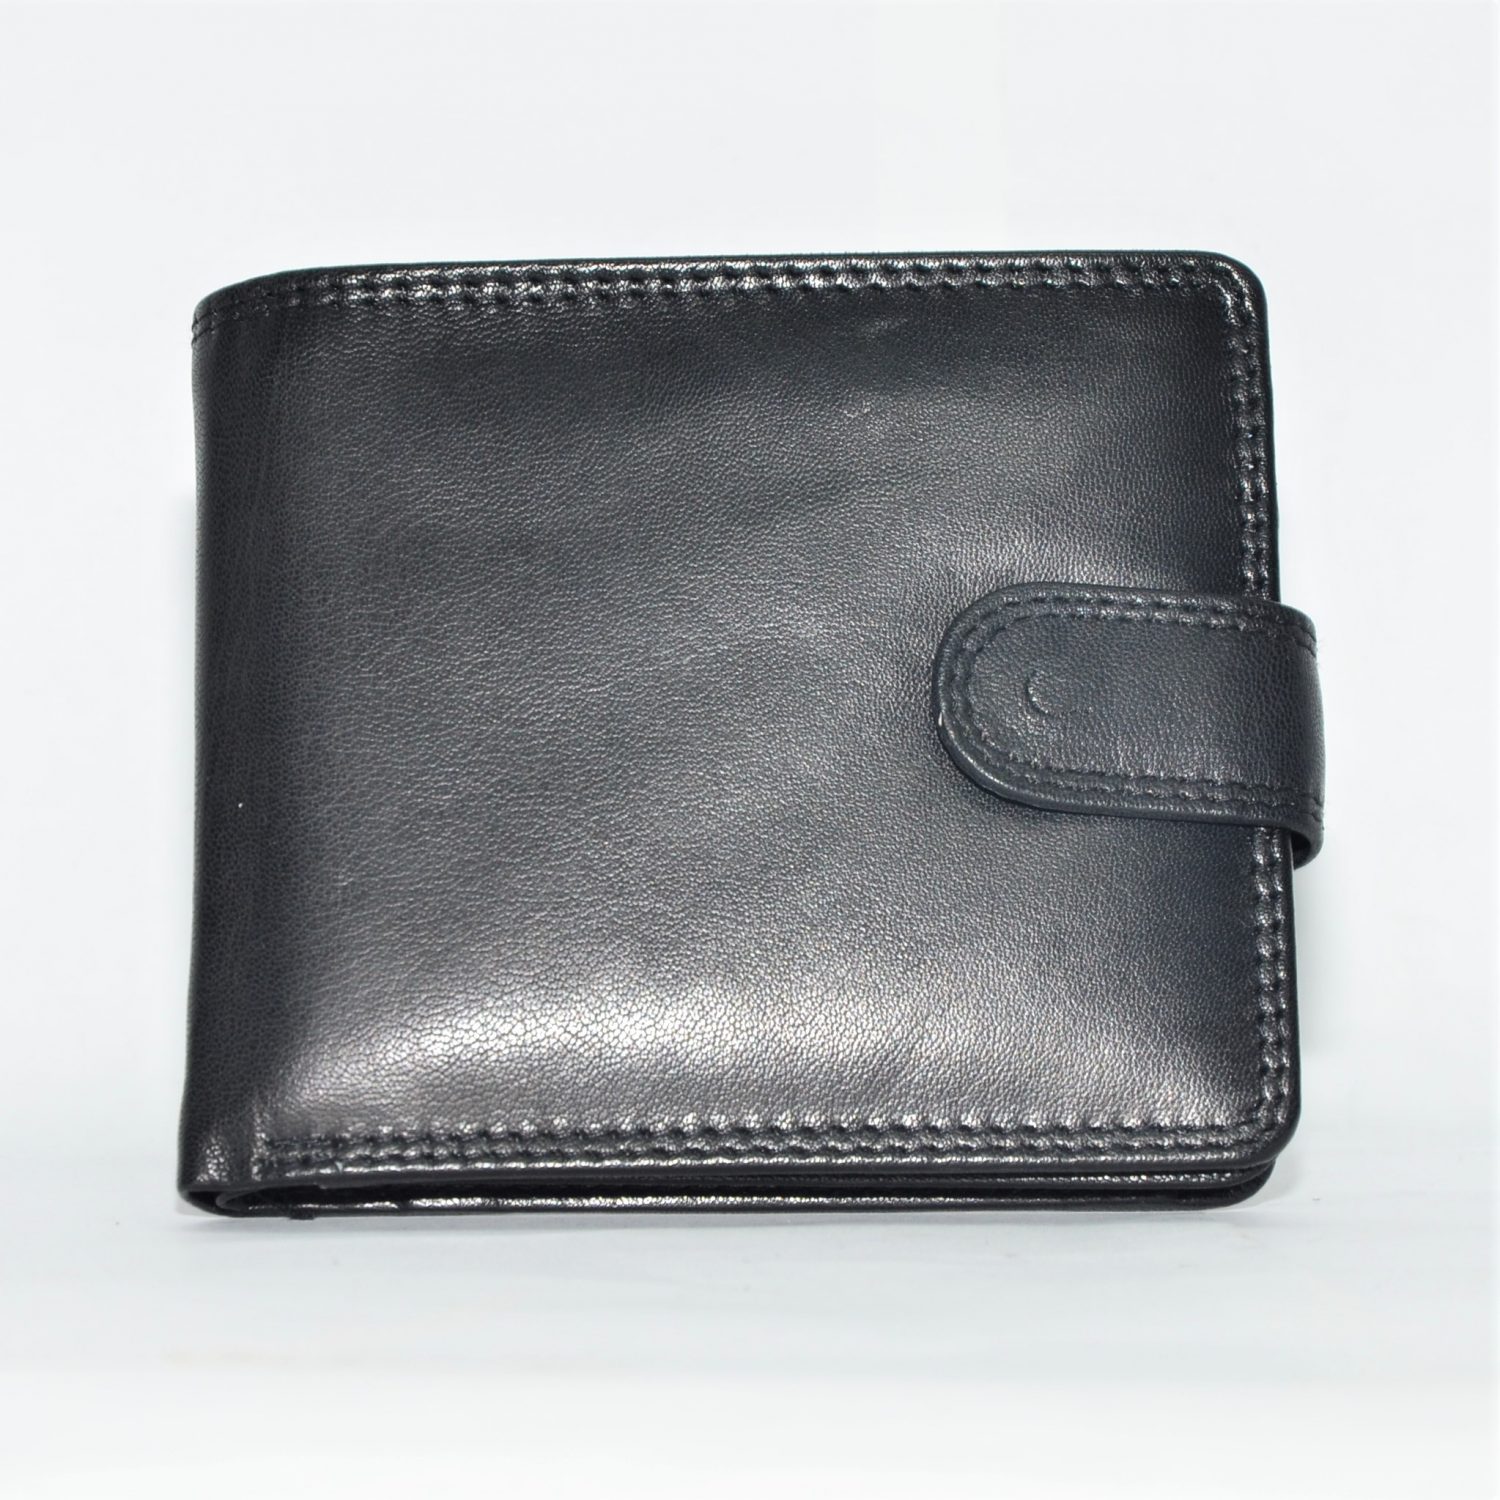 Primehide Leather RFID Wallet - Style No. 7012 - OJP Products